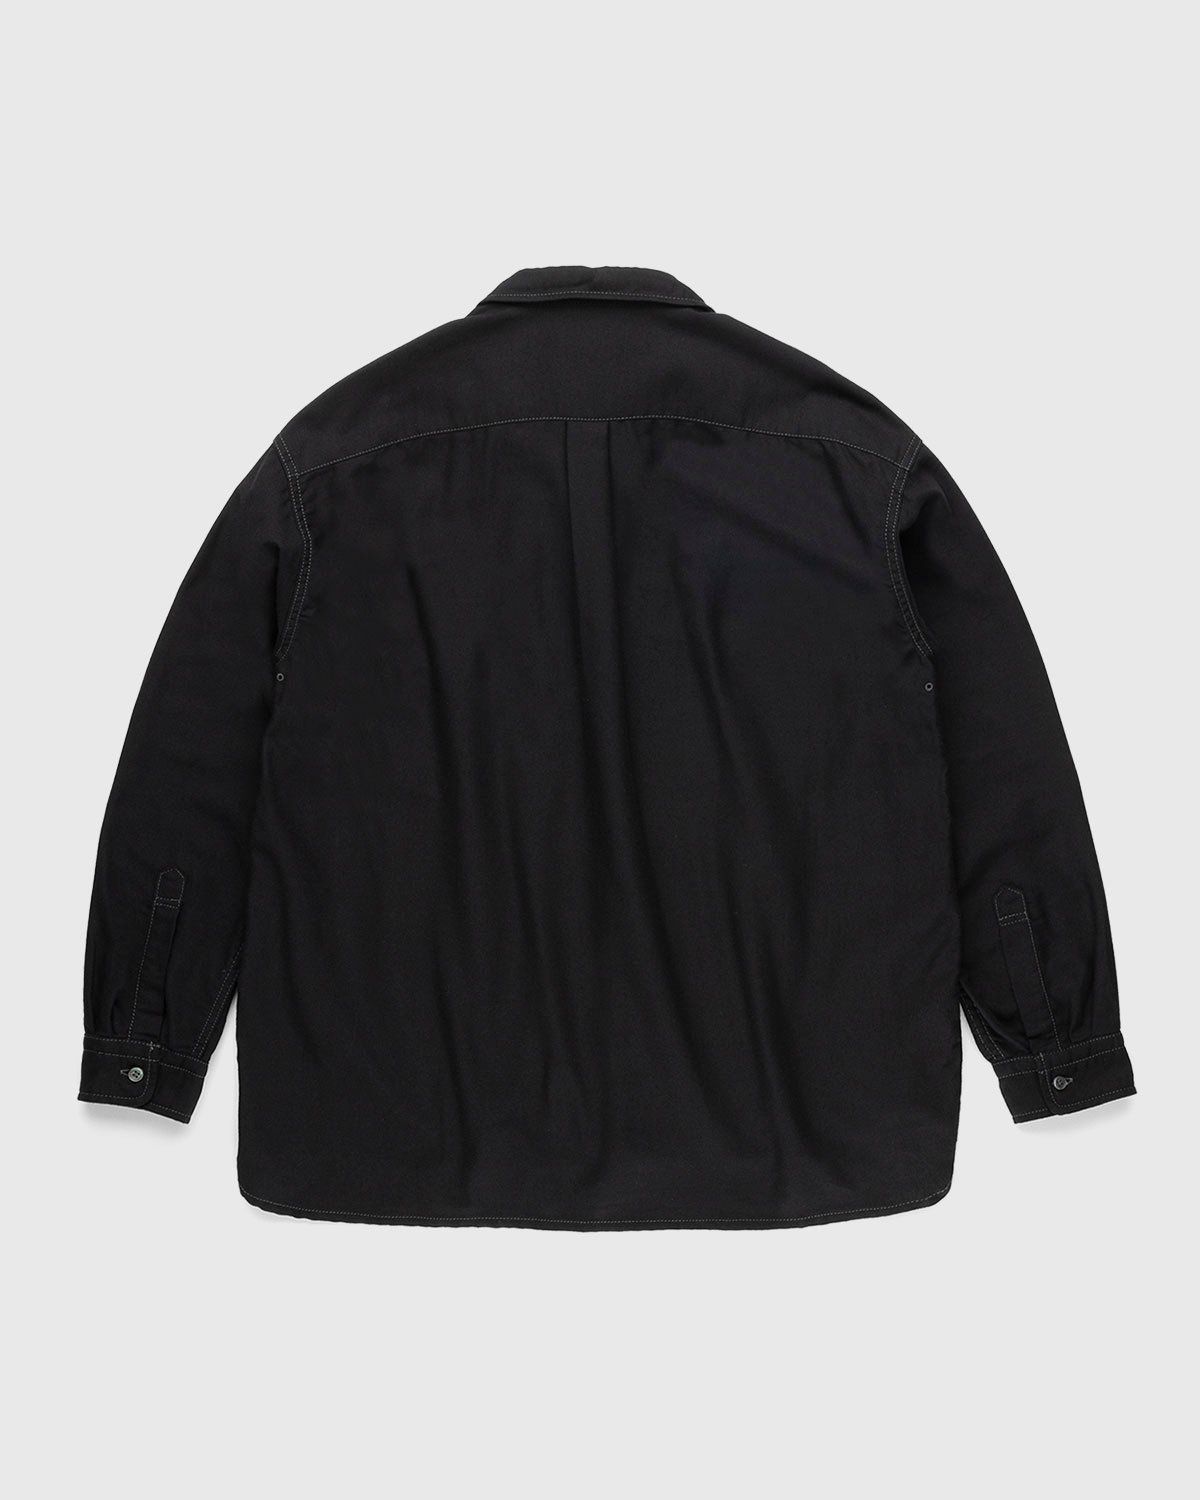 And Wander – Thermonel Pullover Shirt (M) Black - Overshirt - Black - Image 2